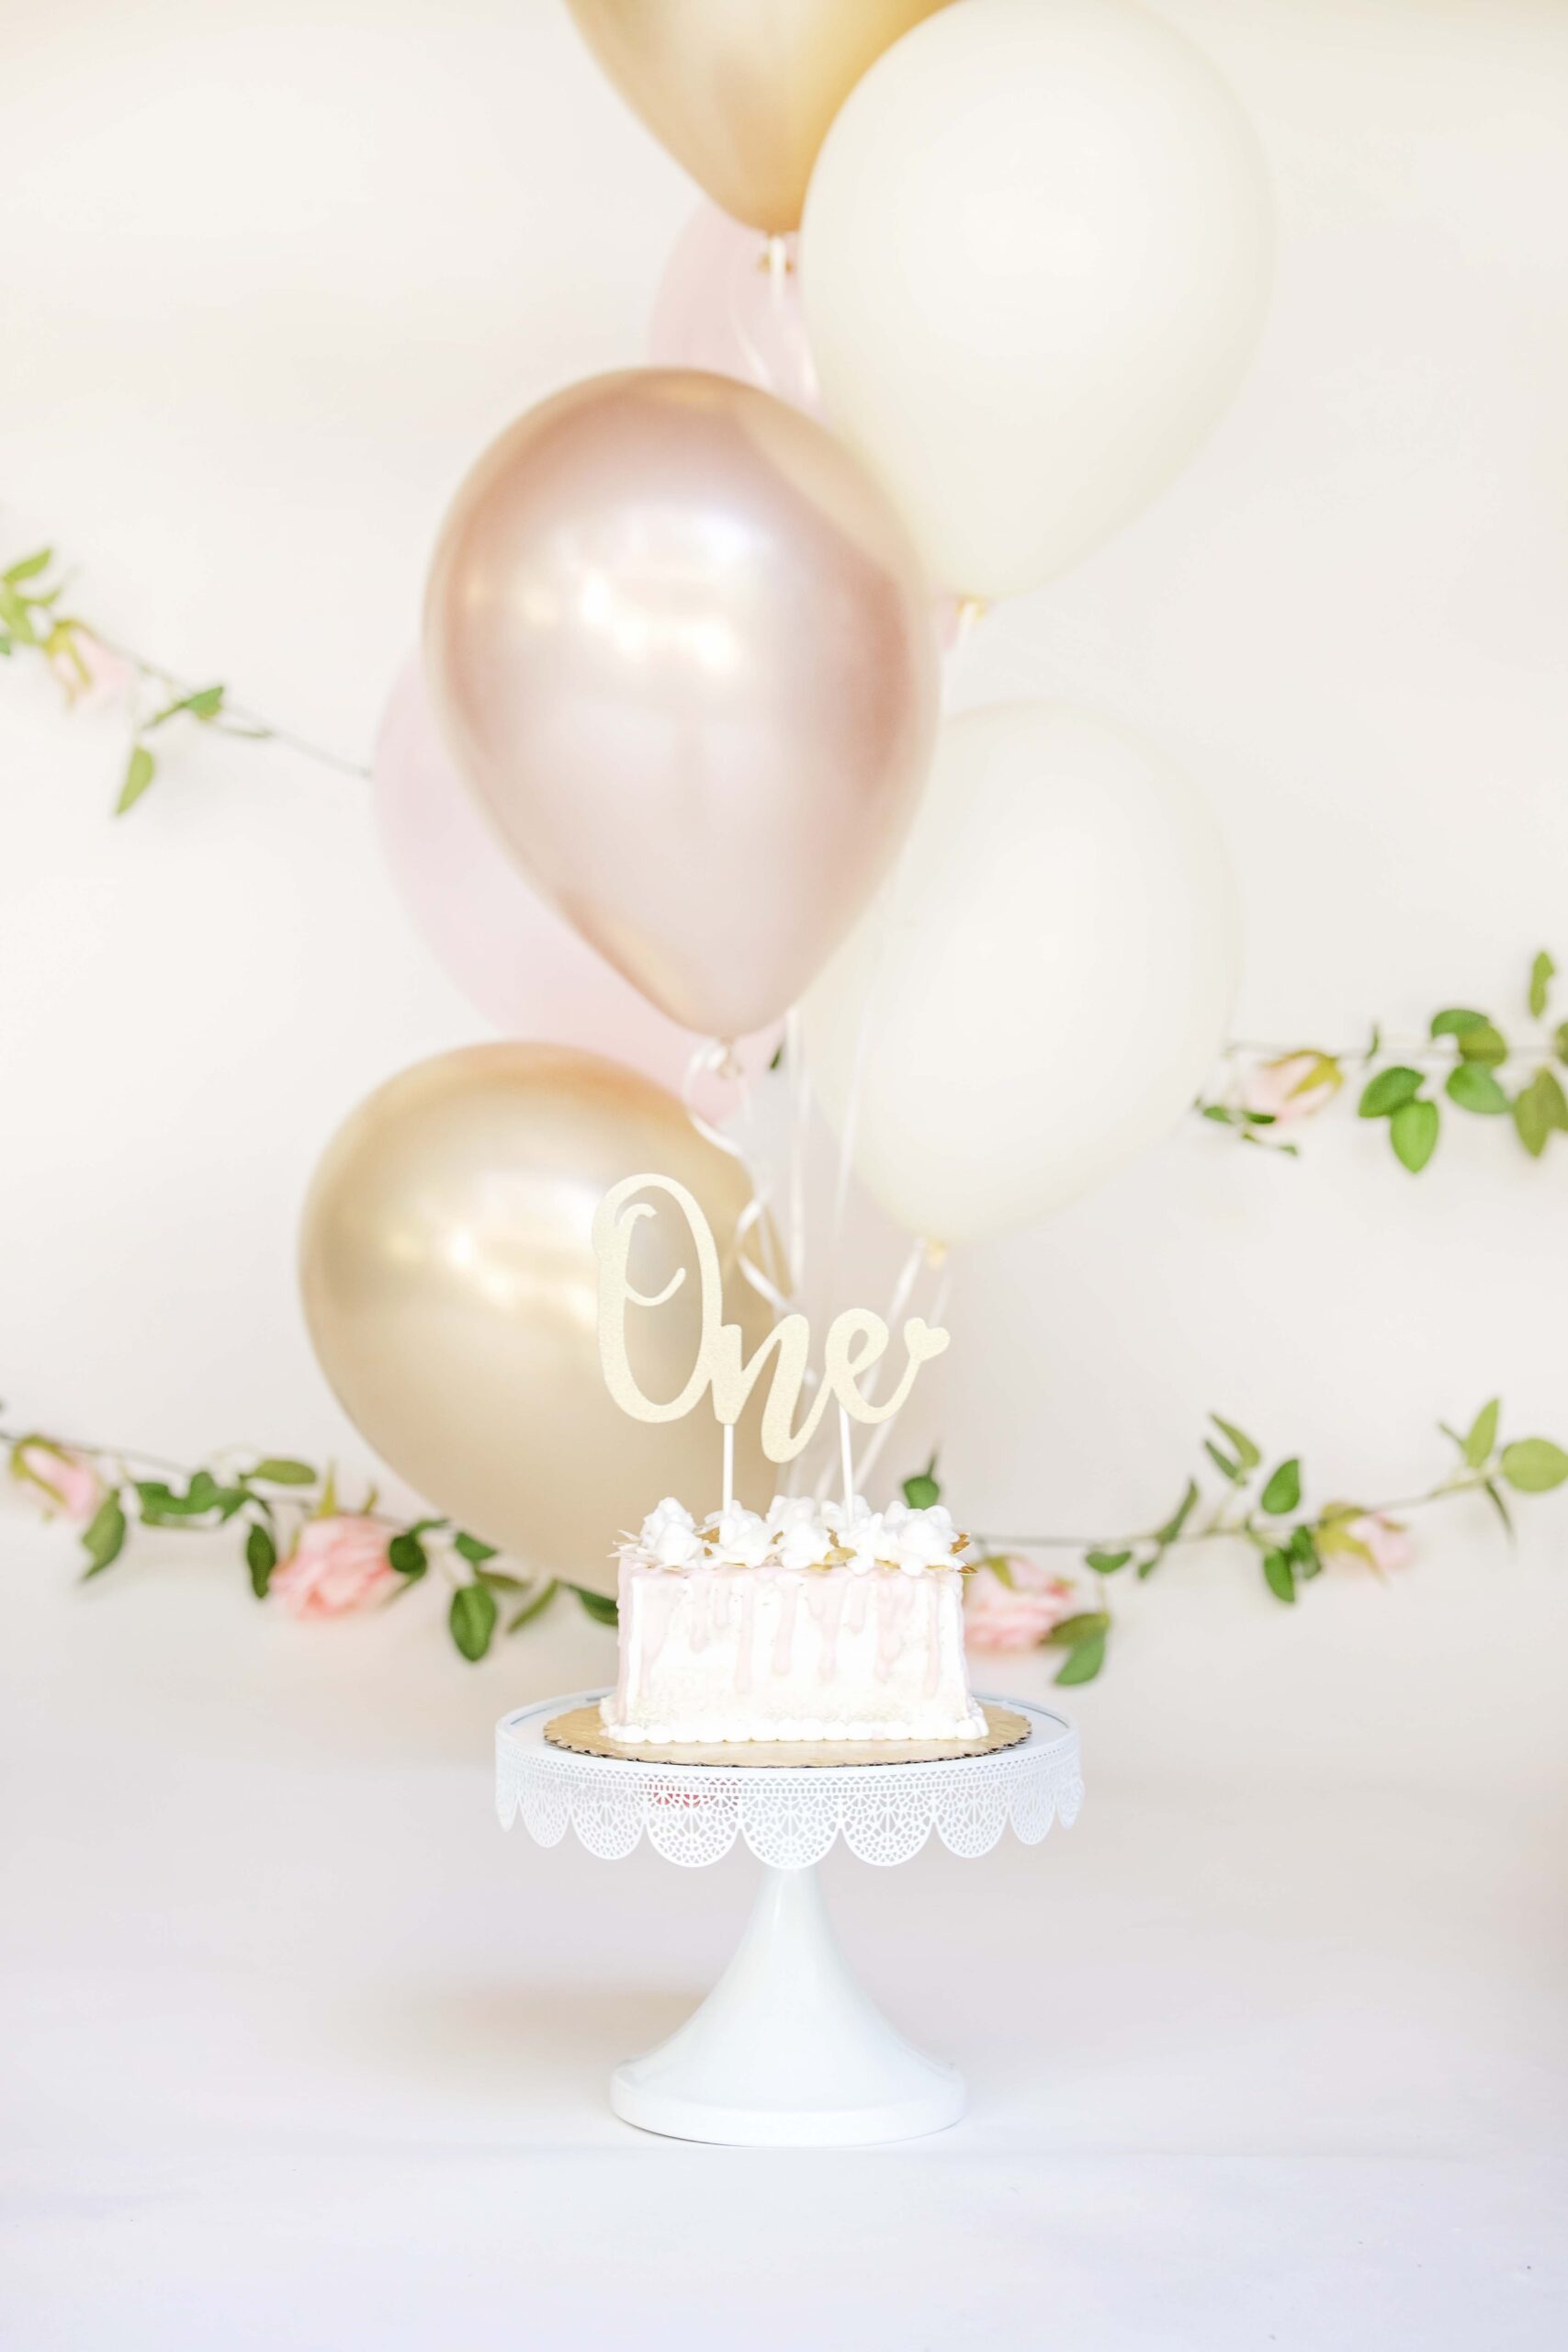 Cake for a cake smash in front of gold balloons and a floral garland